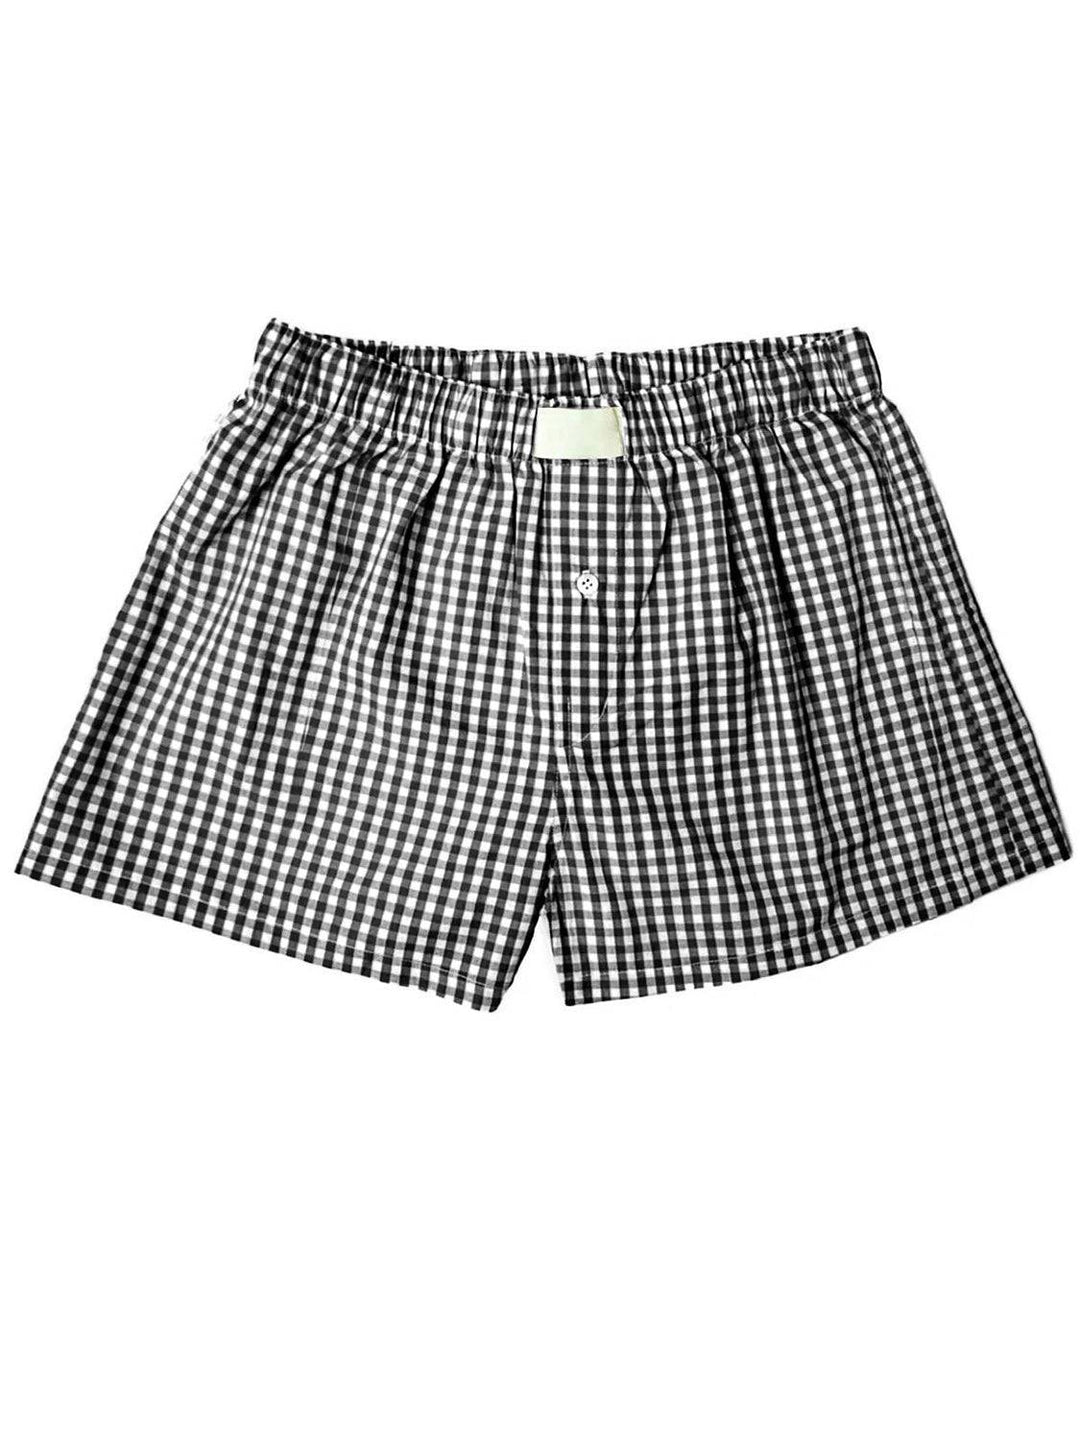 a black and white checkered boxers with a white tag